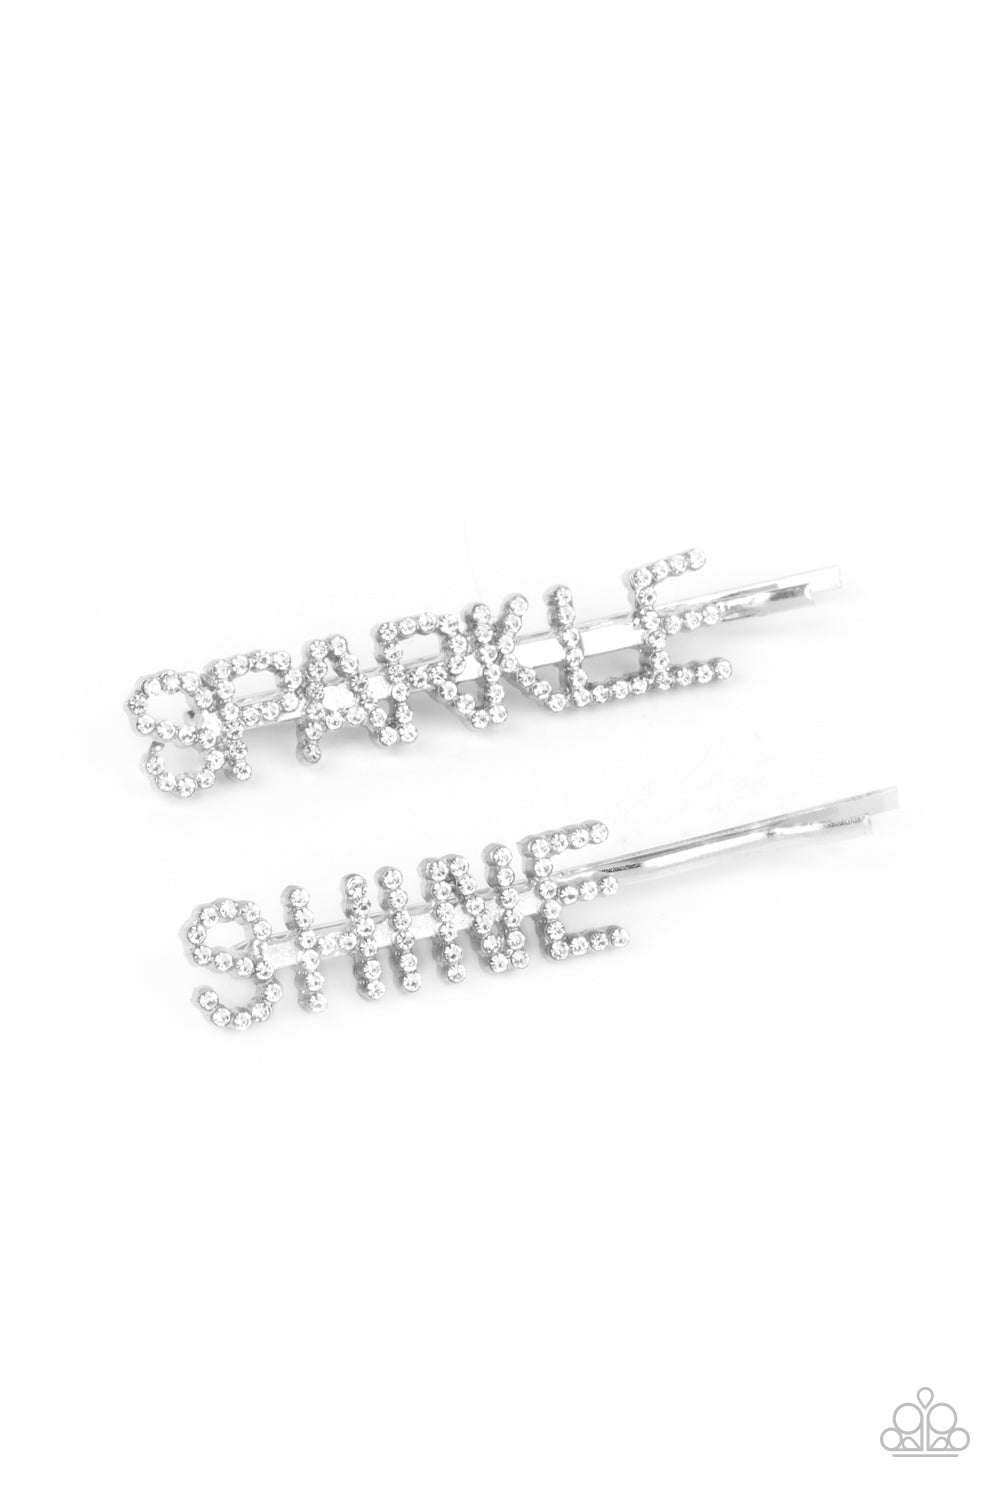 Center of the SPARKLE-verse - White Hair Clip - Paparazzi Accessories